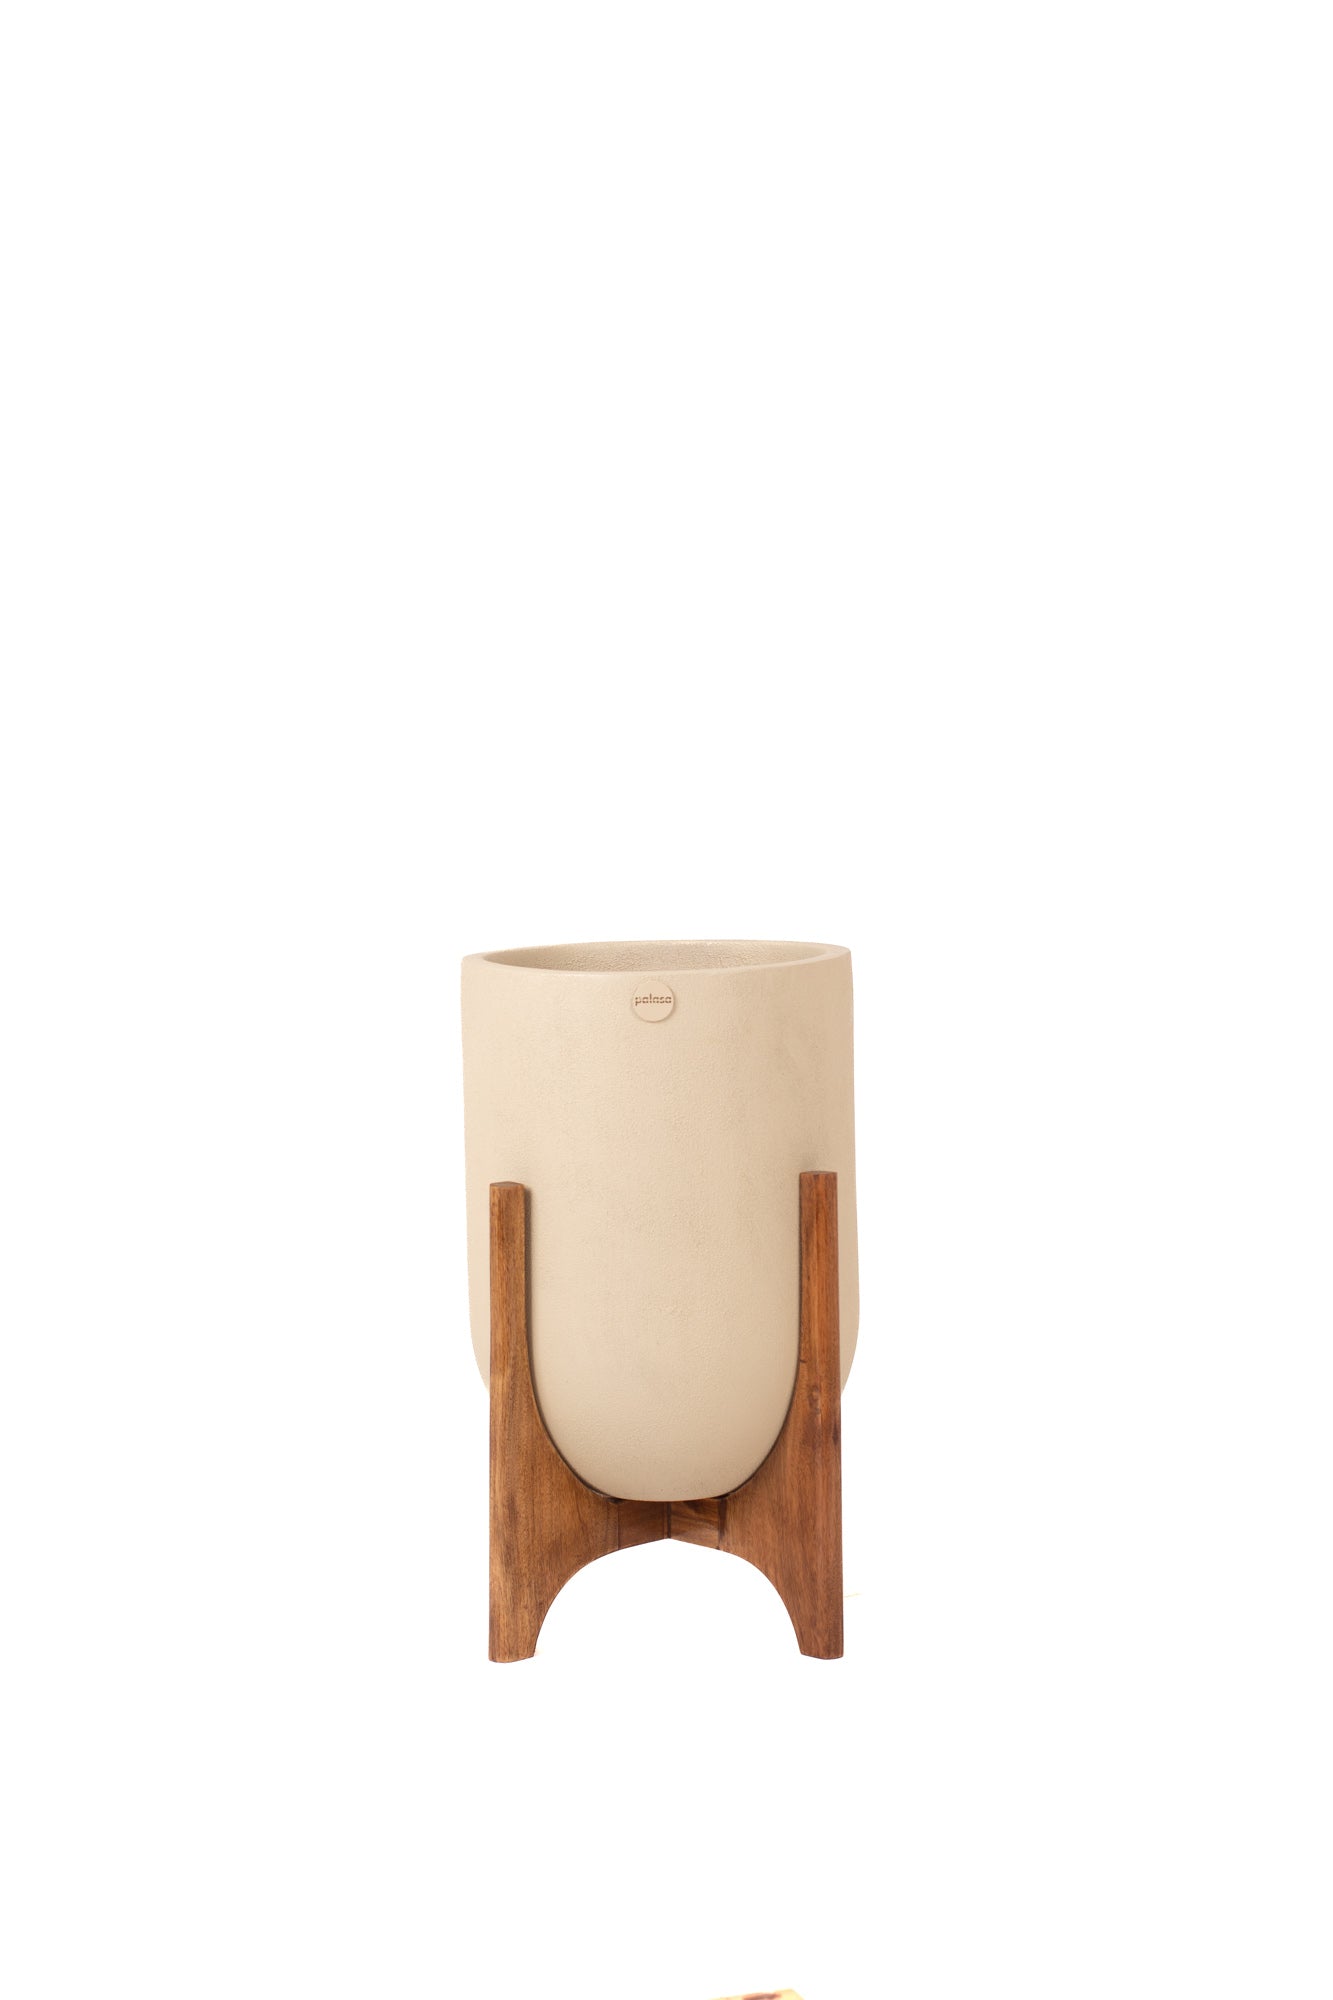 An Ode to the mid century designs with the beige Ammo Planter with Woods stand. This Beige FRP Planter is a perfect planter to place indoors. Shop online for FRP Planter Pots.